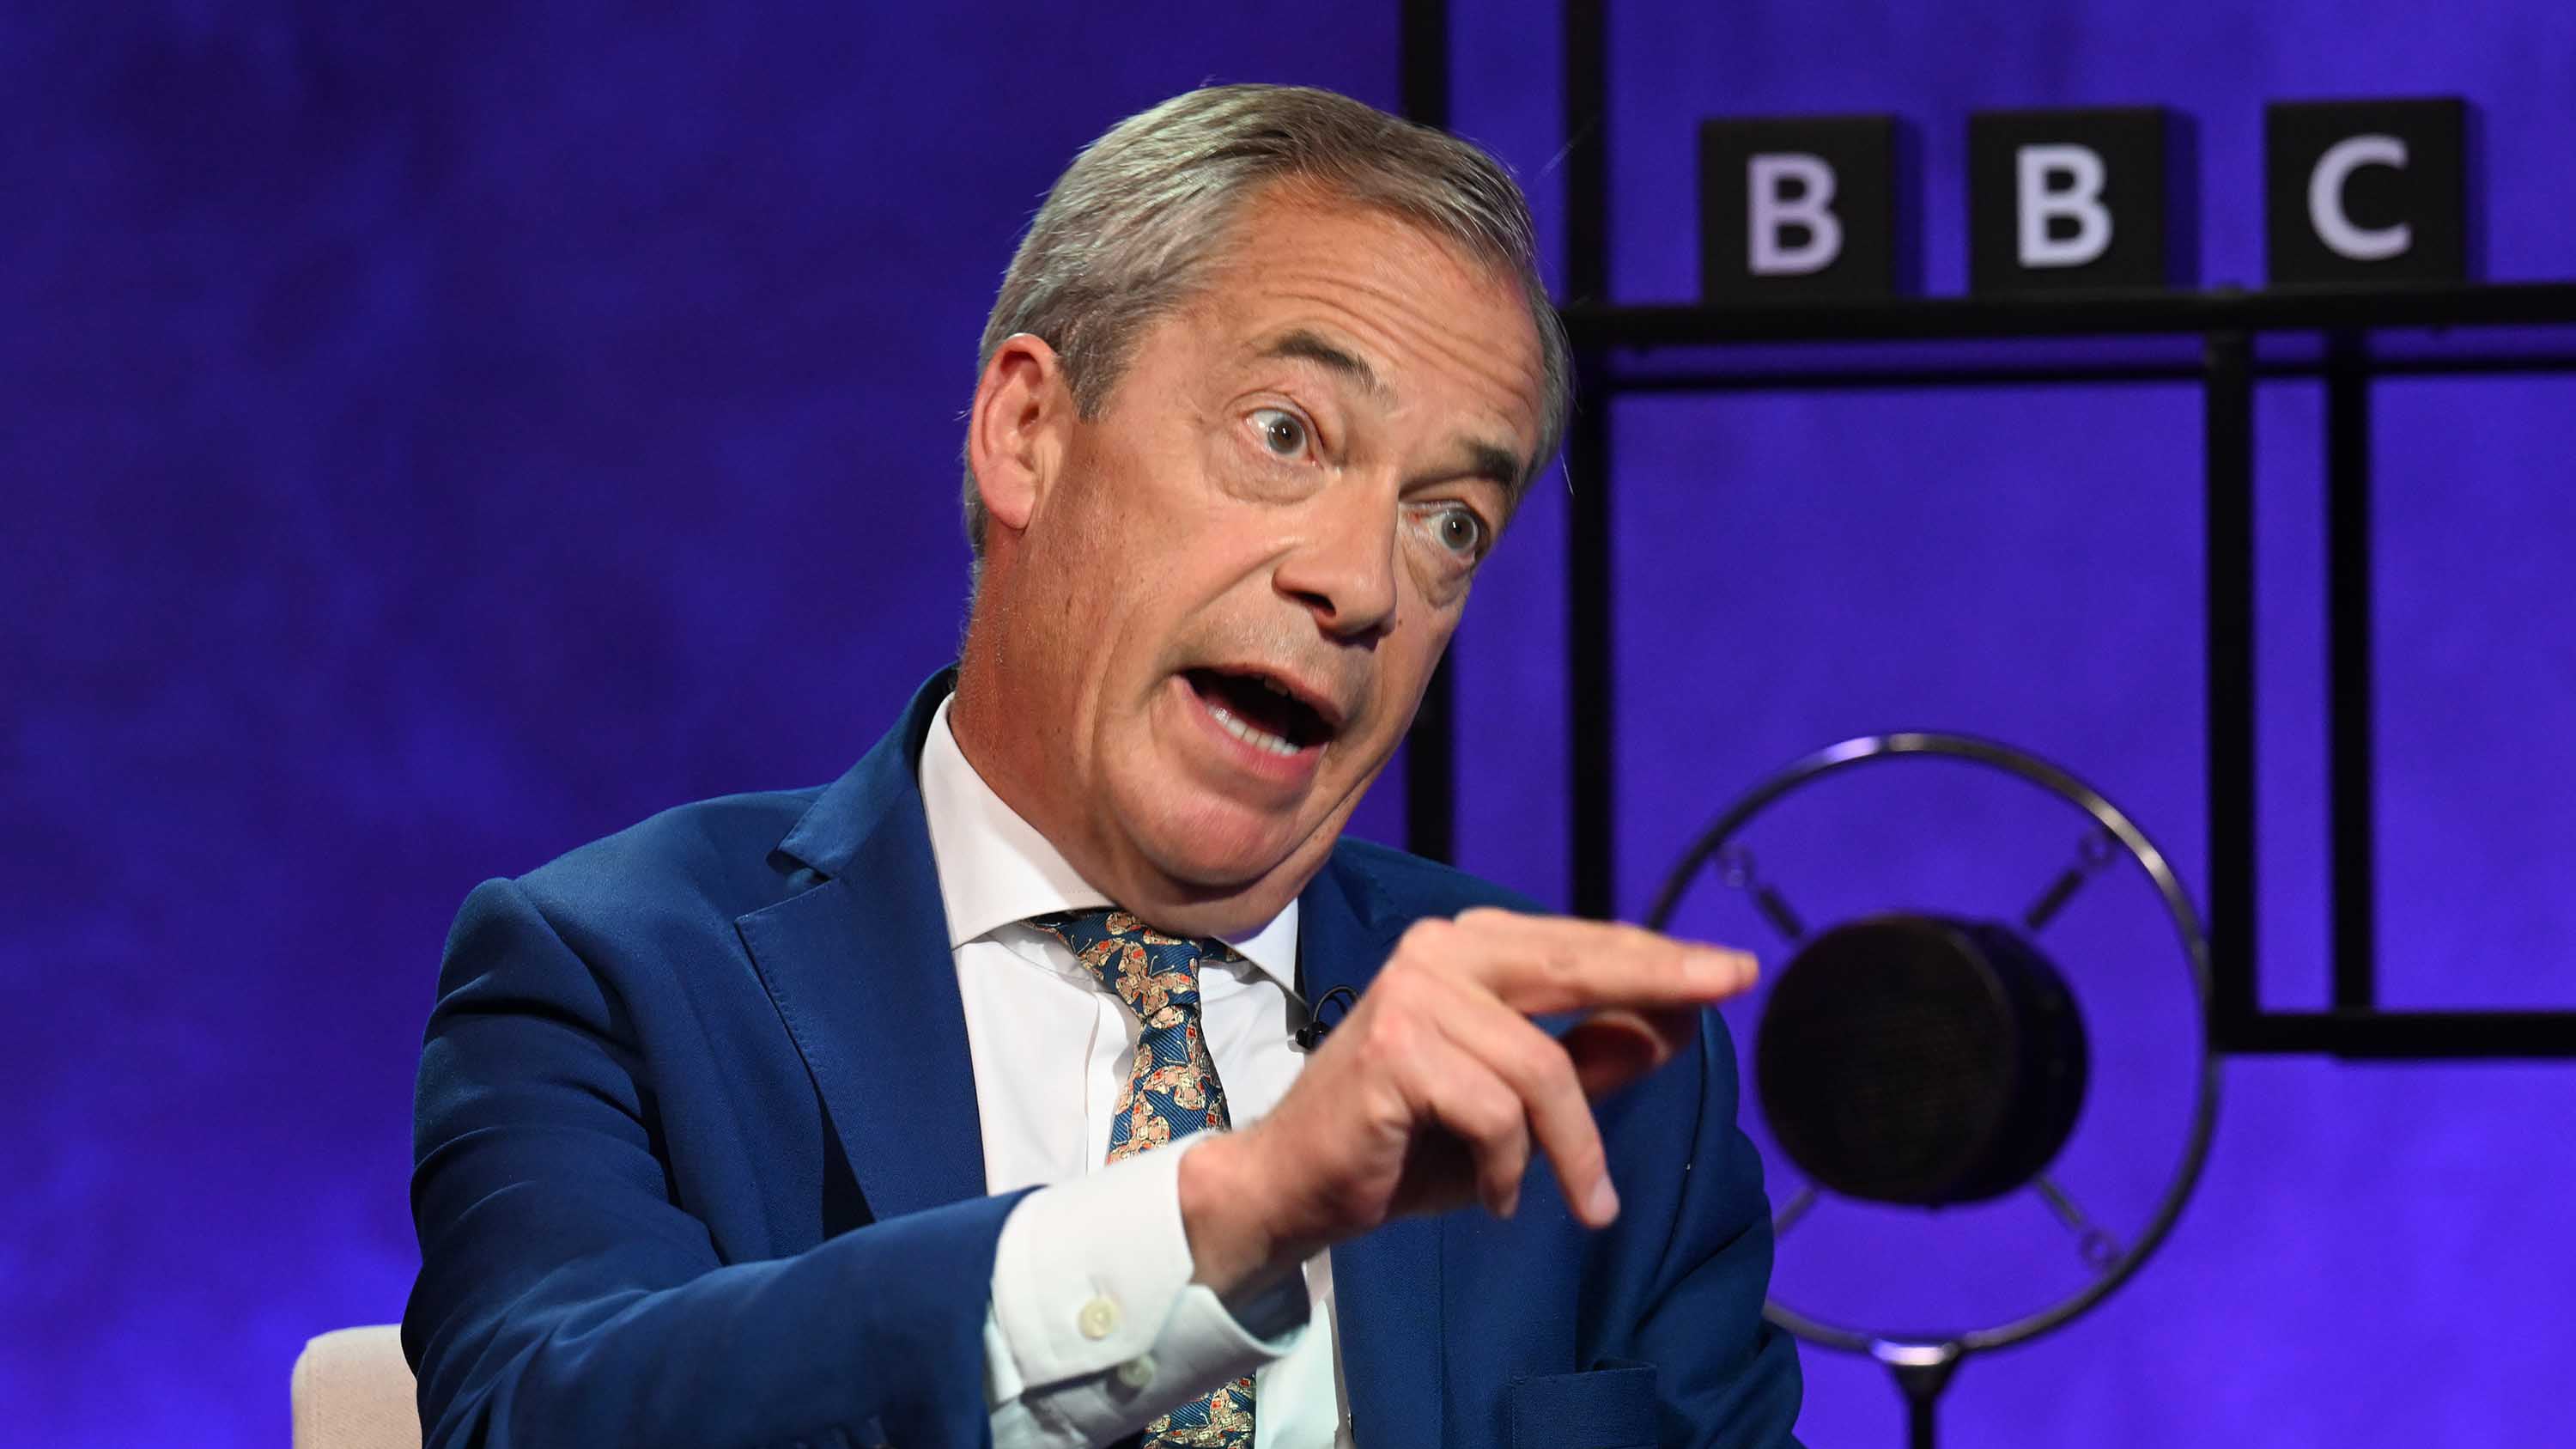 Nigel Farage has been accused of being a Putin apologist